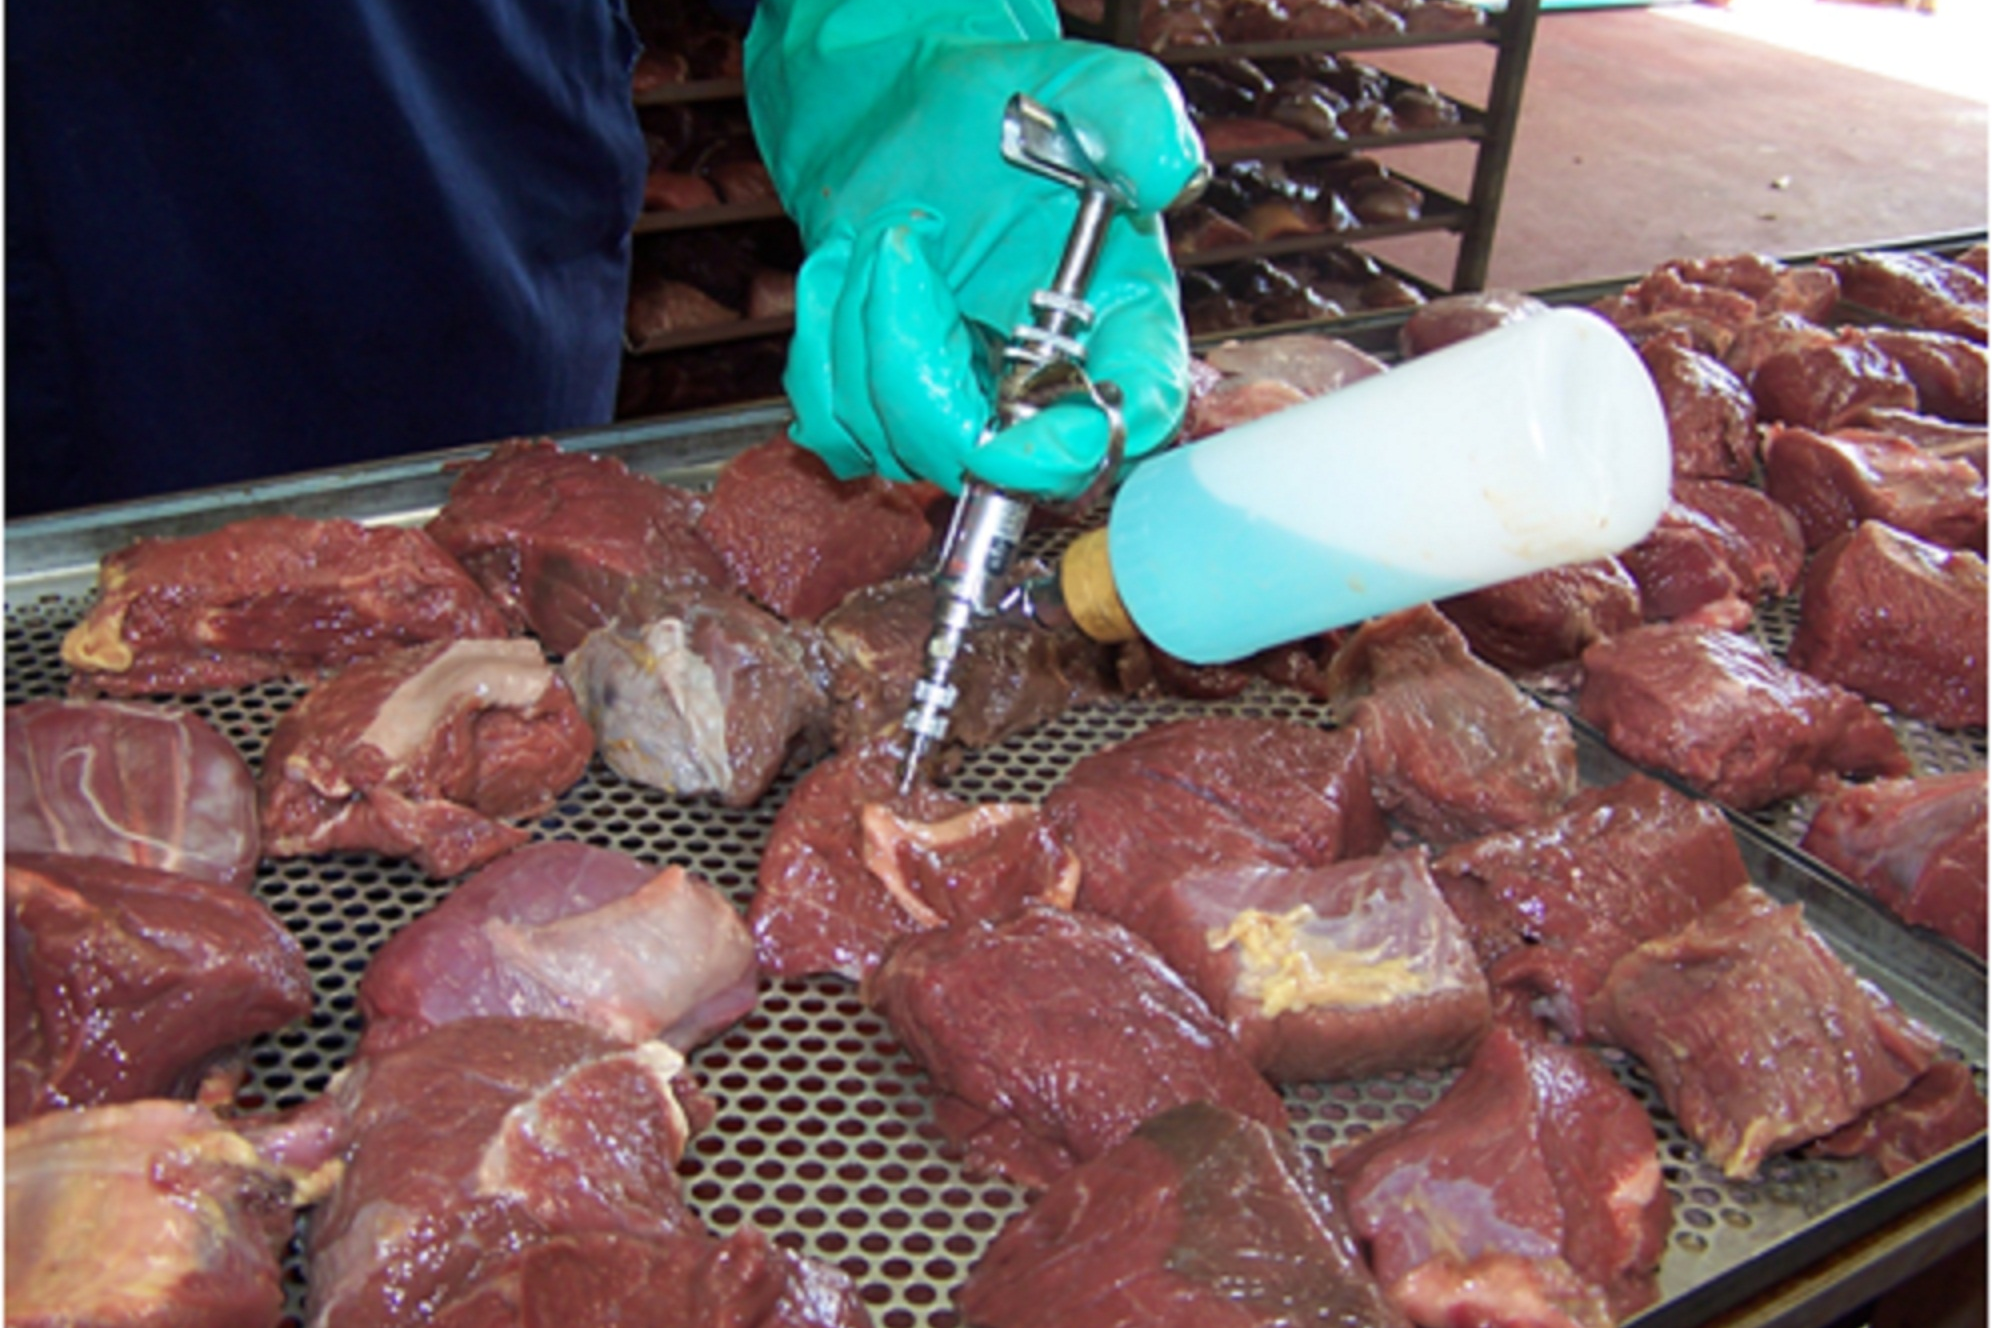 Meat being injected with 1080 poison